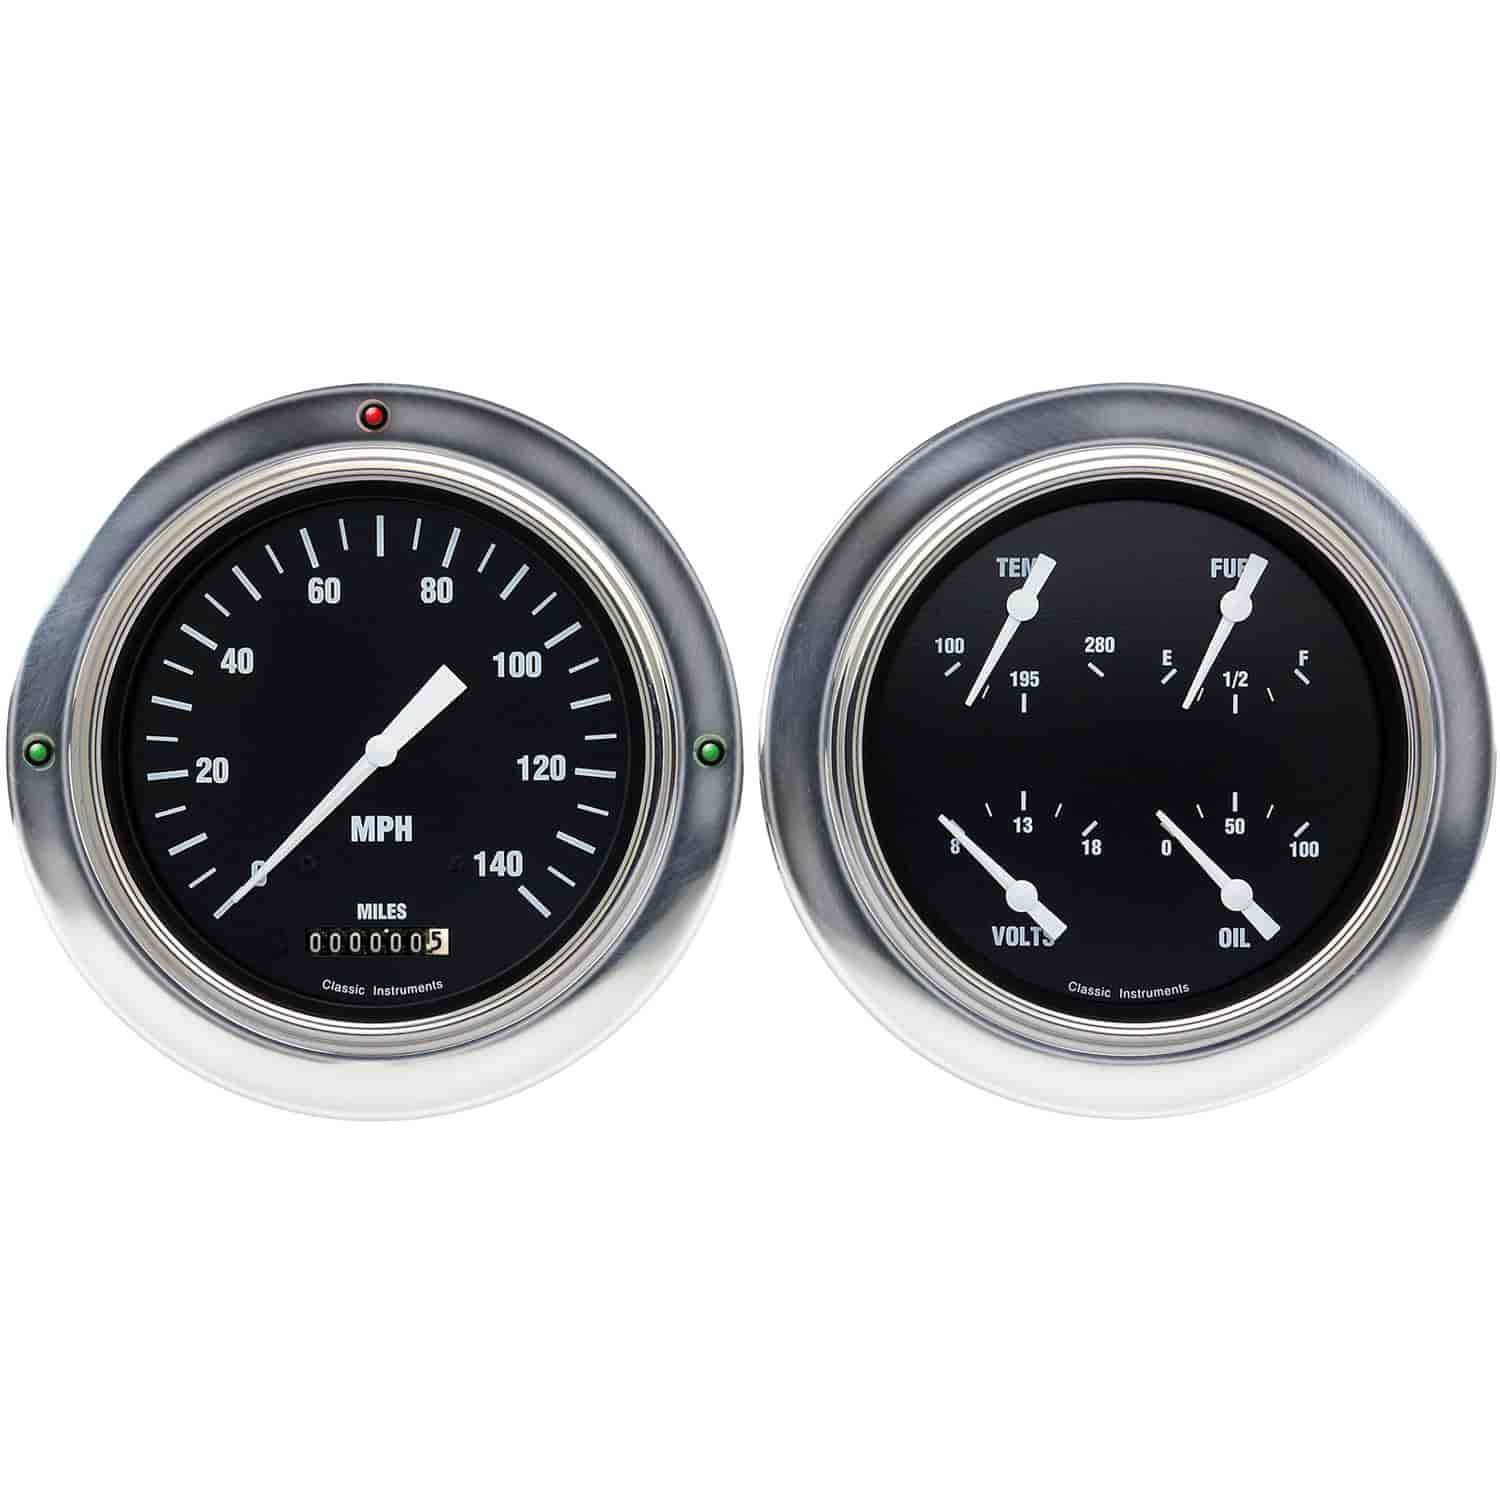 Hot Rod Series Gauge Package 1954-55 Chevy Truck (First Series) Includes: